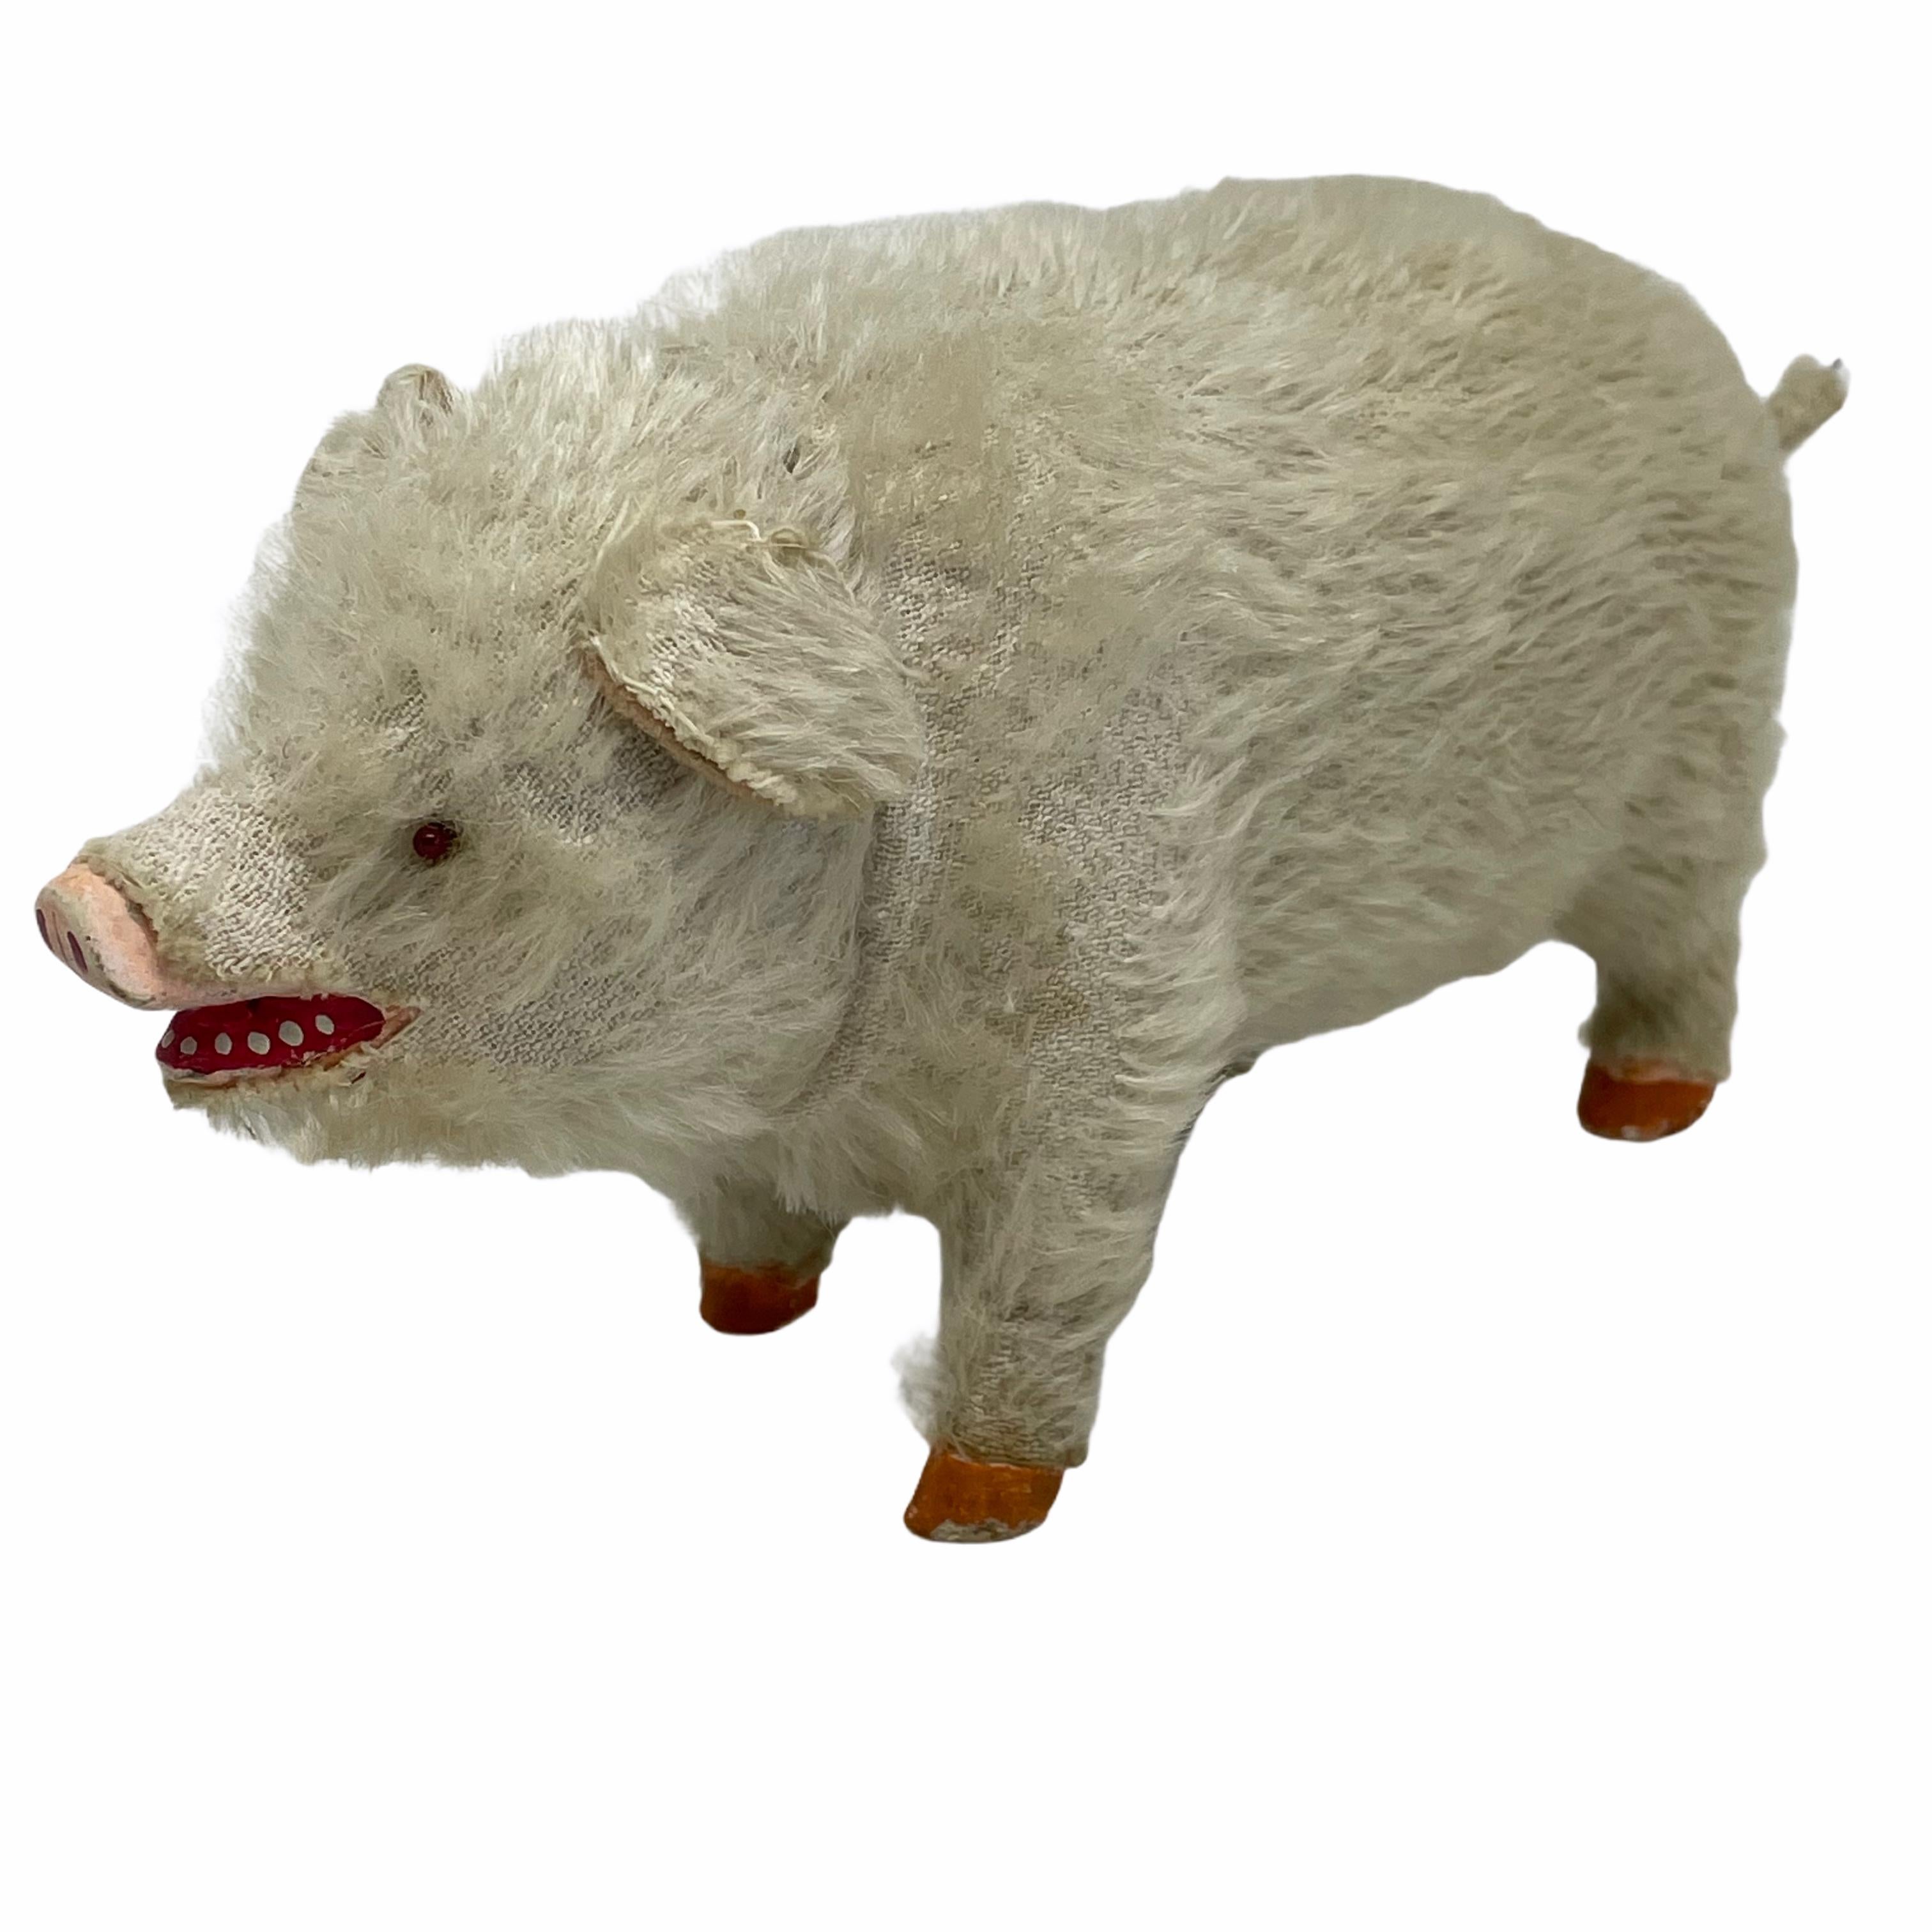 A beautiful pink pig candy container. Made of paper mache, covered with mohair and has glass eyes. Nice addition to your Christmas or new years collection or decoration. It is from the 1900s. Found at an estate sale in Vienna, Austria.